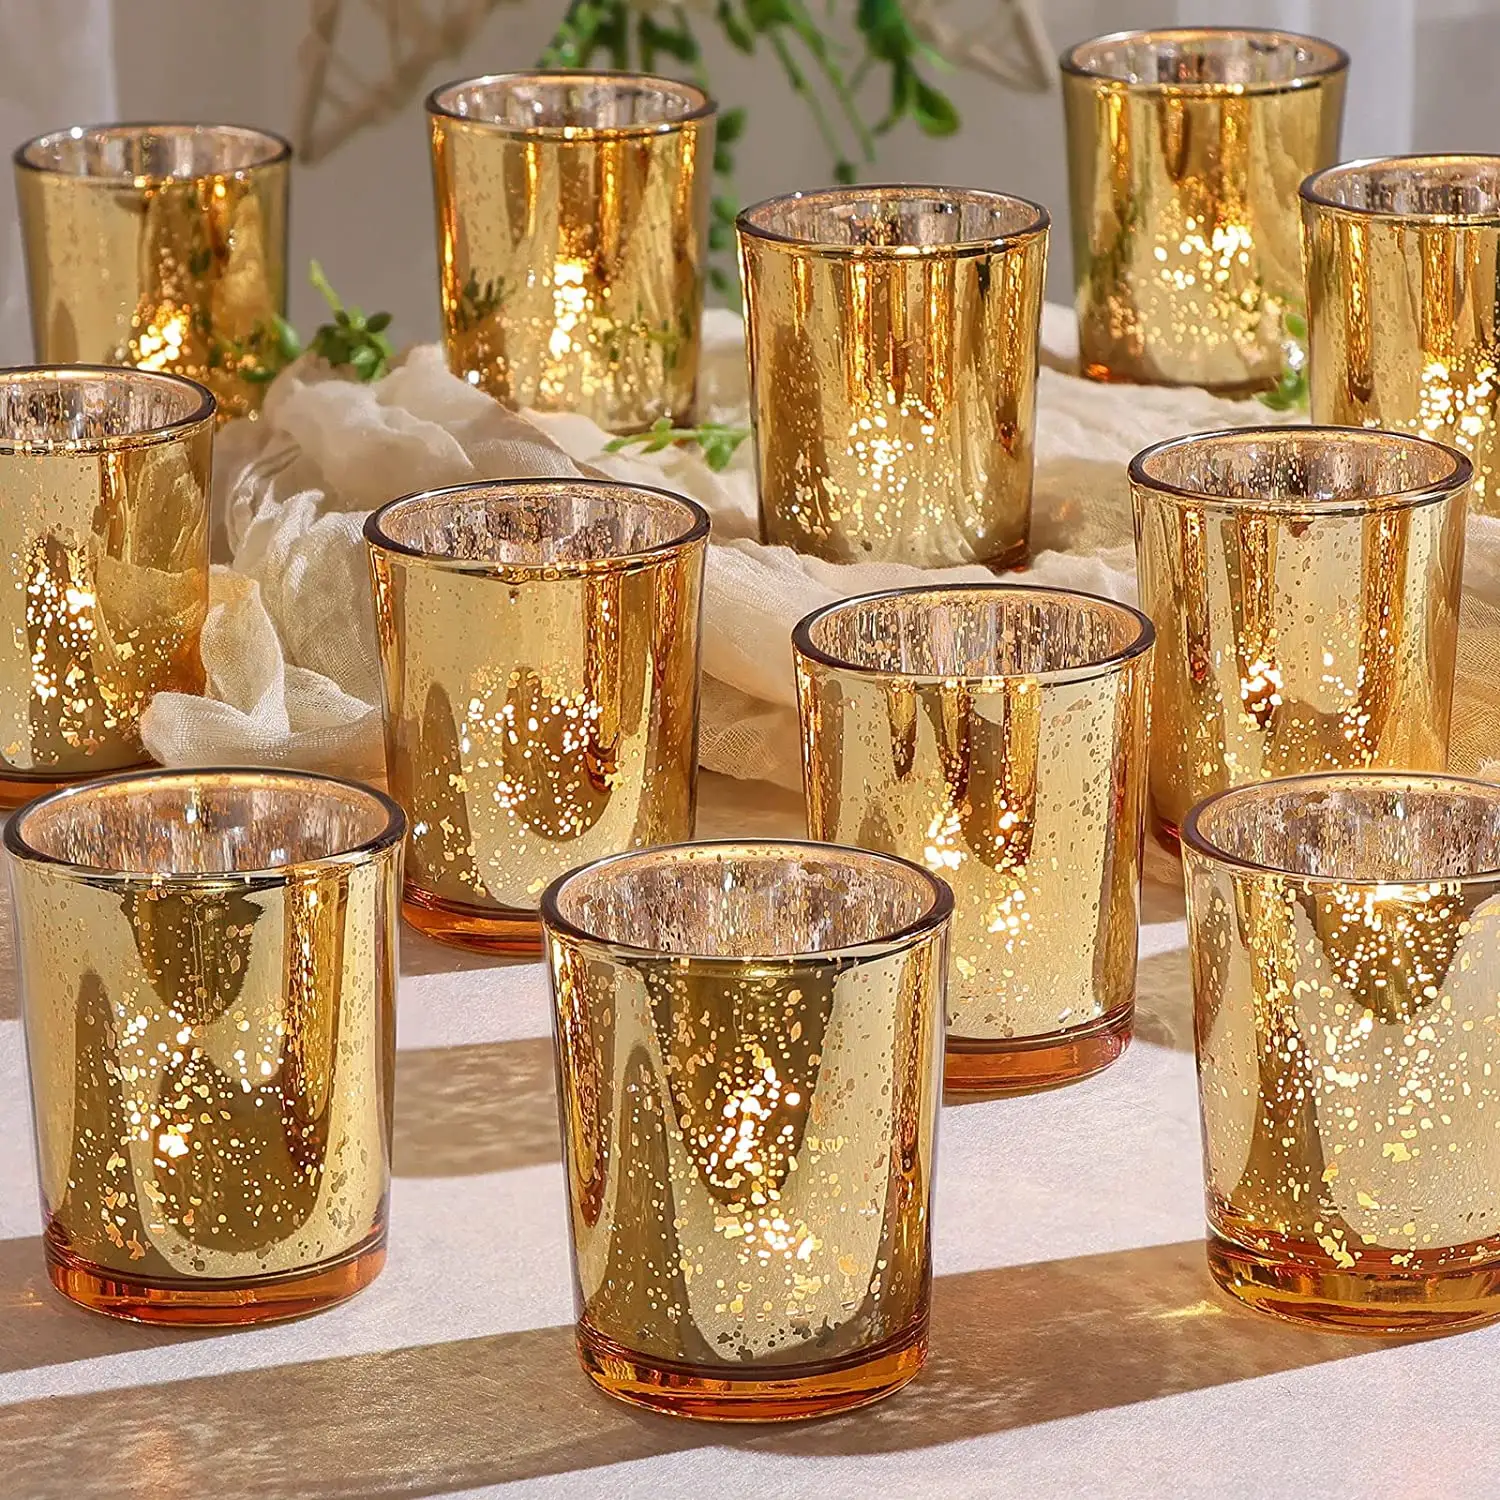 Gold Mercury Glass Tealight Votive Candle Holders Wedding Centerpieces for Table Decorations